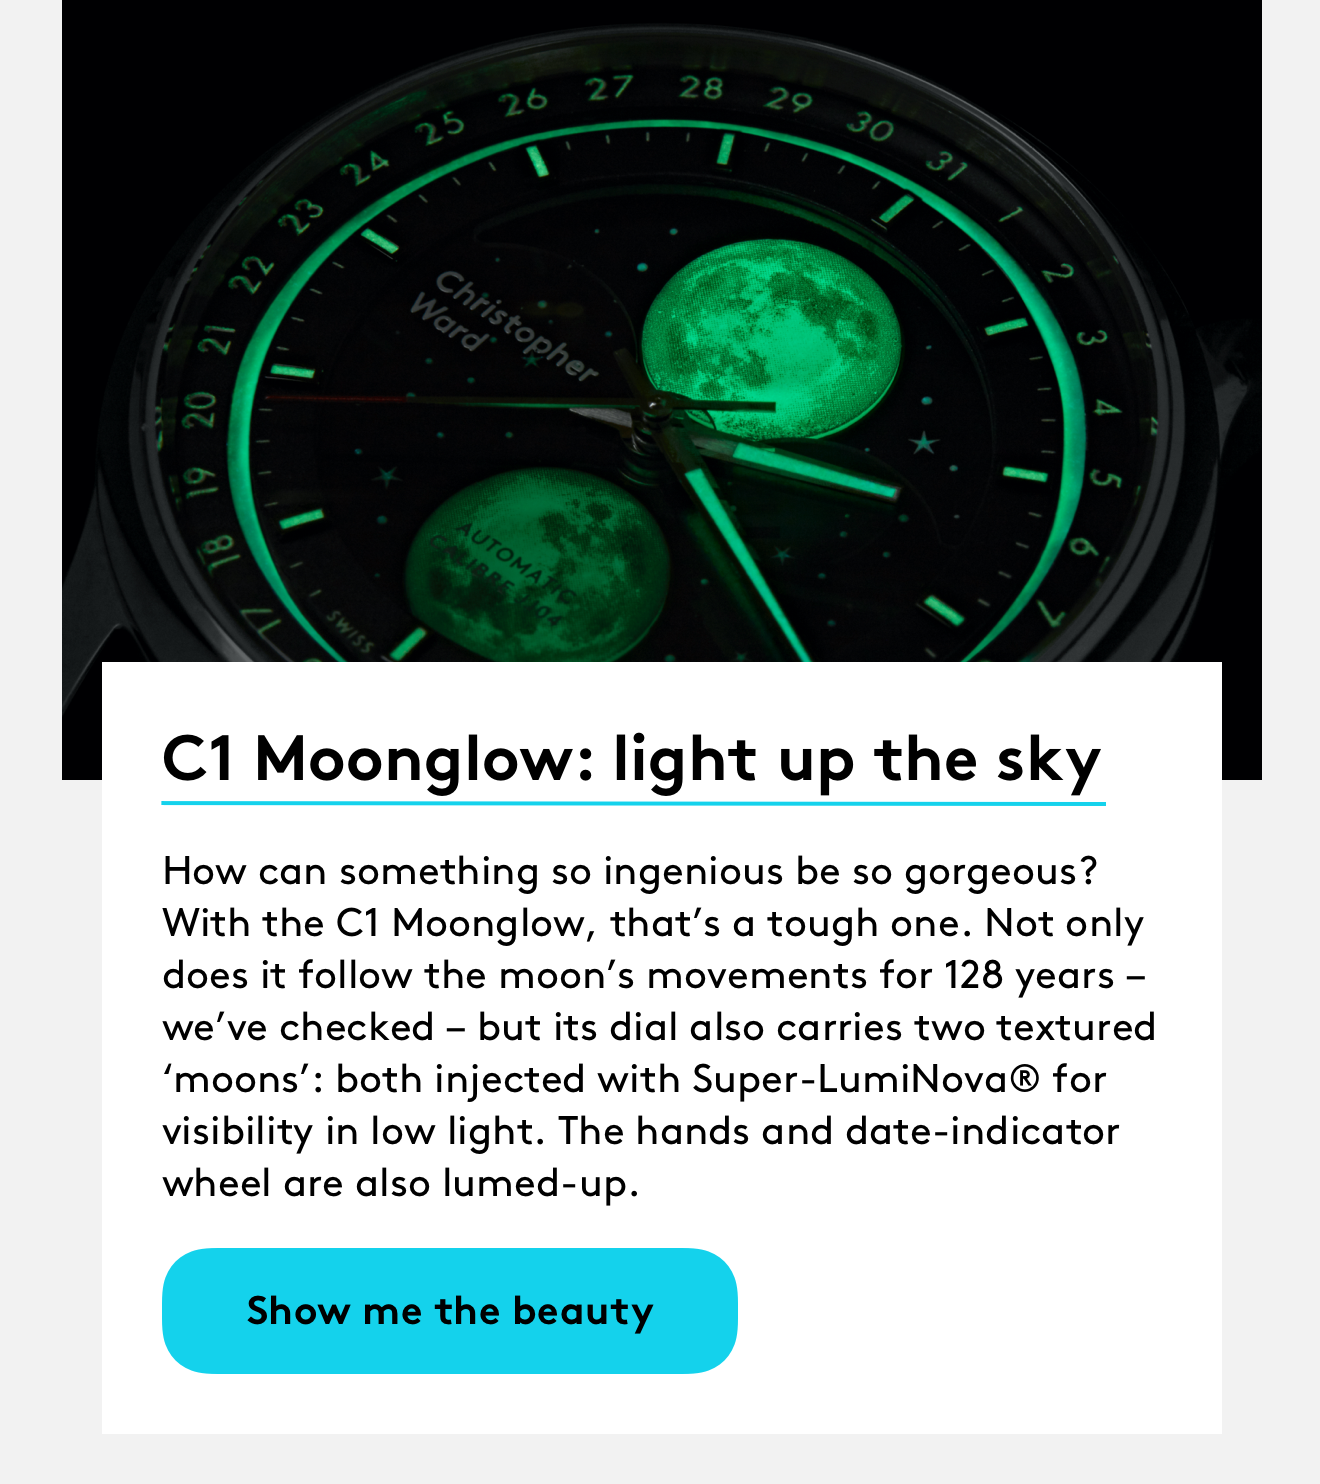 C1 Moonglow: light up the sky